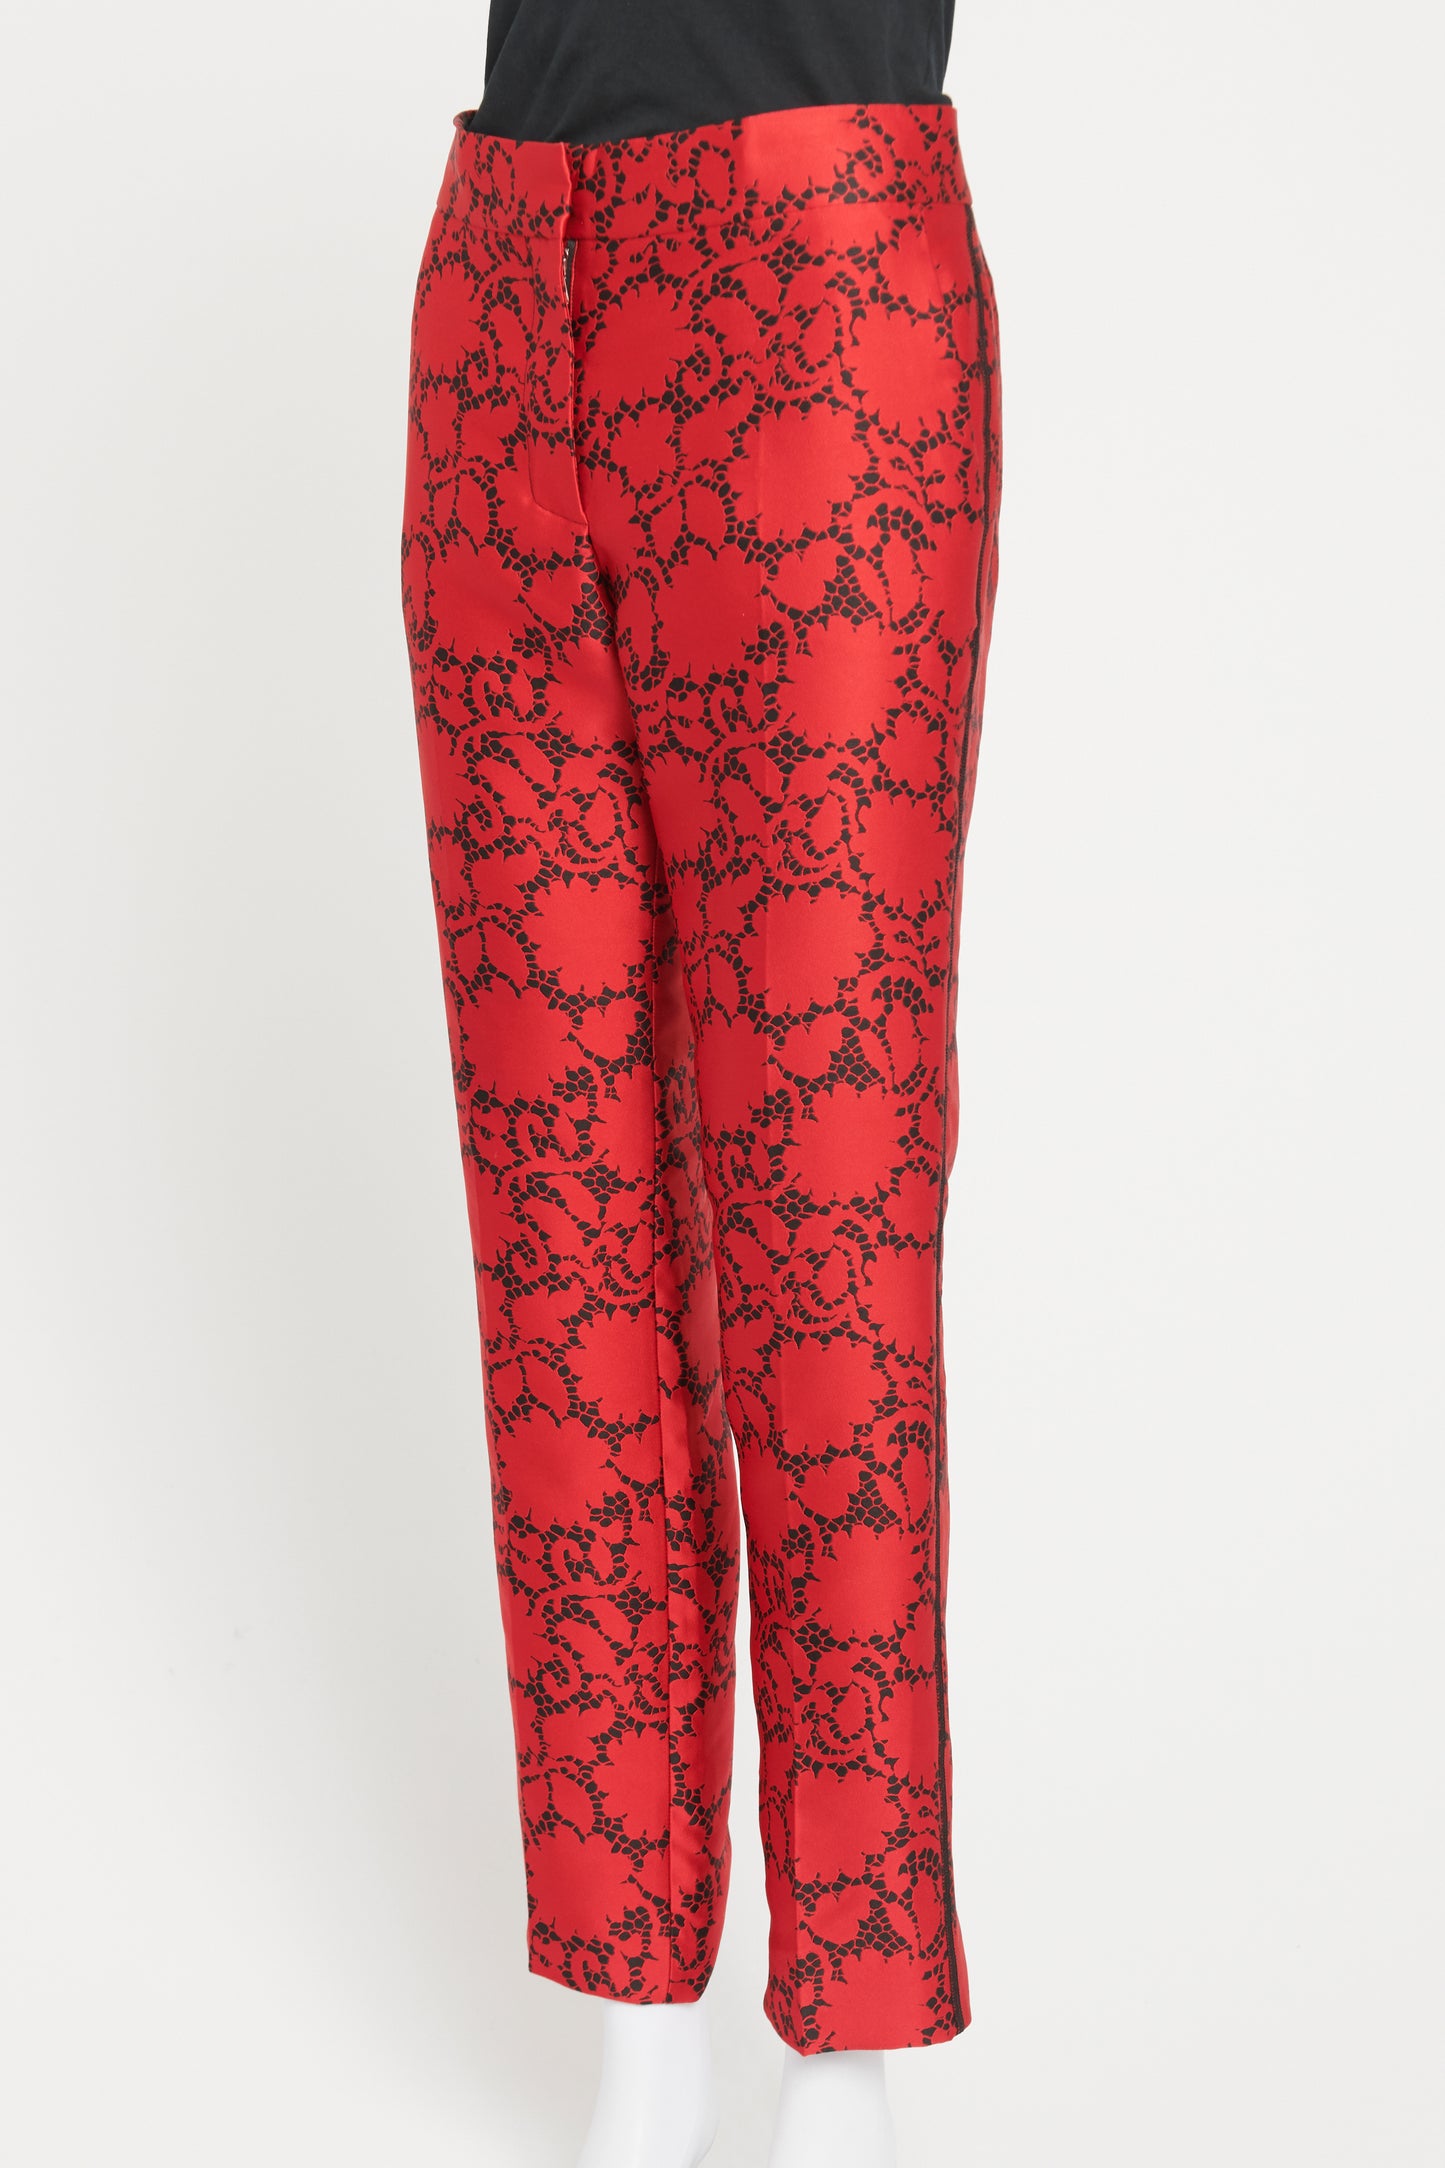 2013 Red Jacquard Preowned Lace Print Trousers